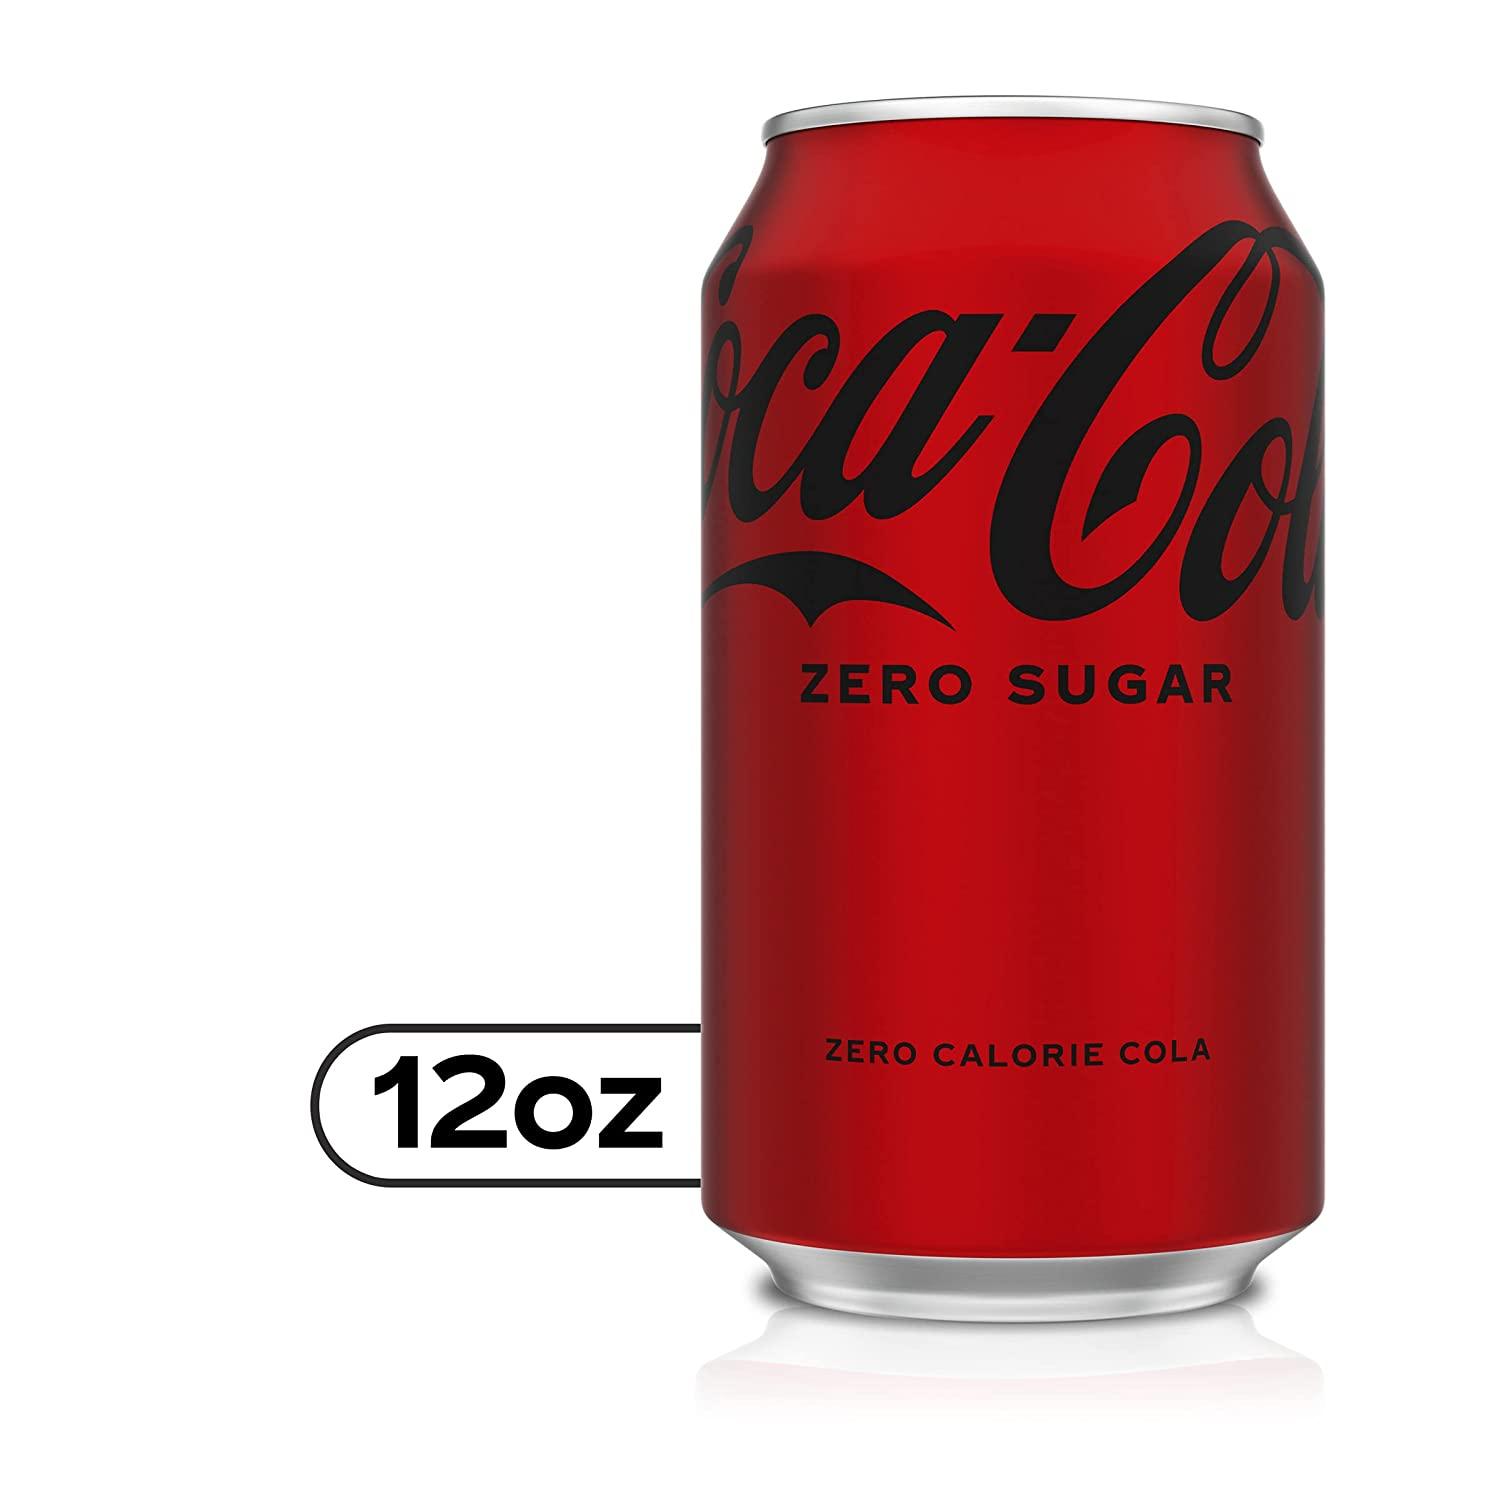 Coke Zero Sugar Cola Soda, 12 oz, 12 Pack (Package May Vary) cola 12 Ounce (Pack of 12)